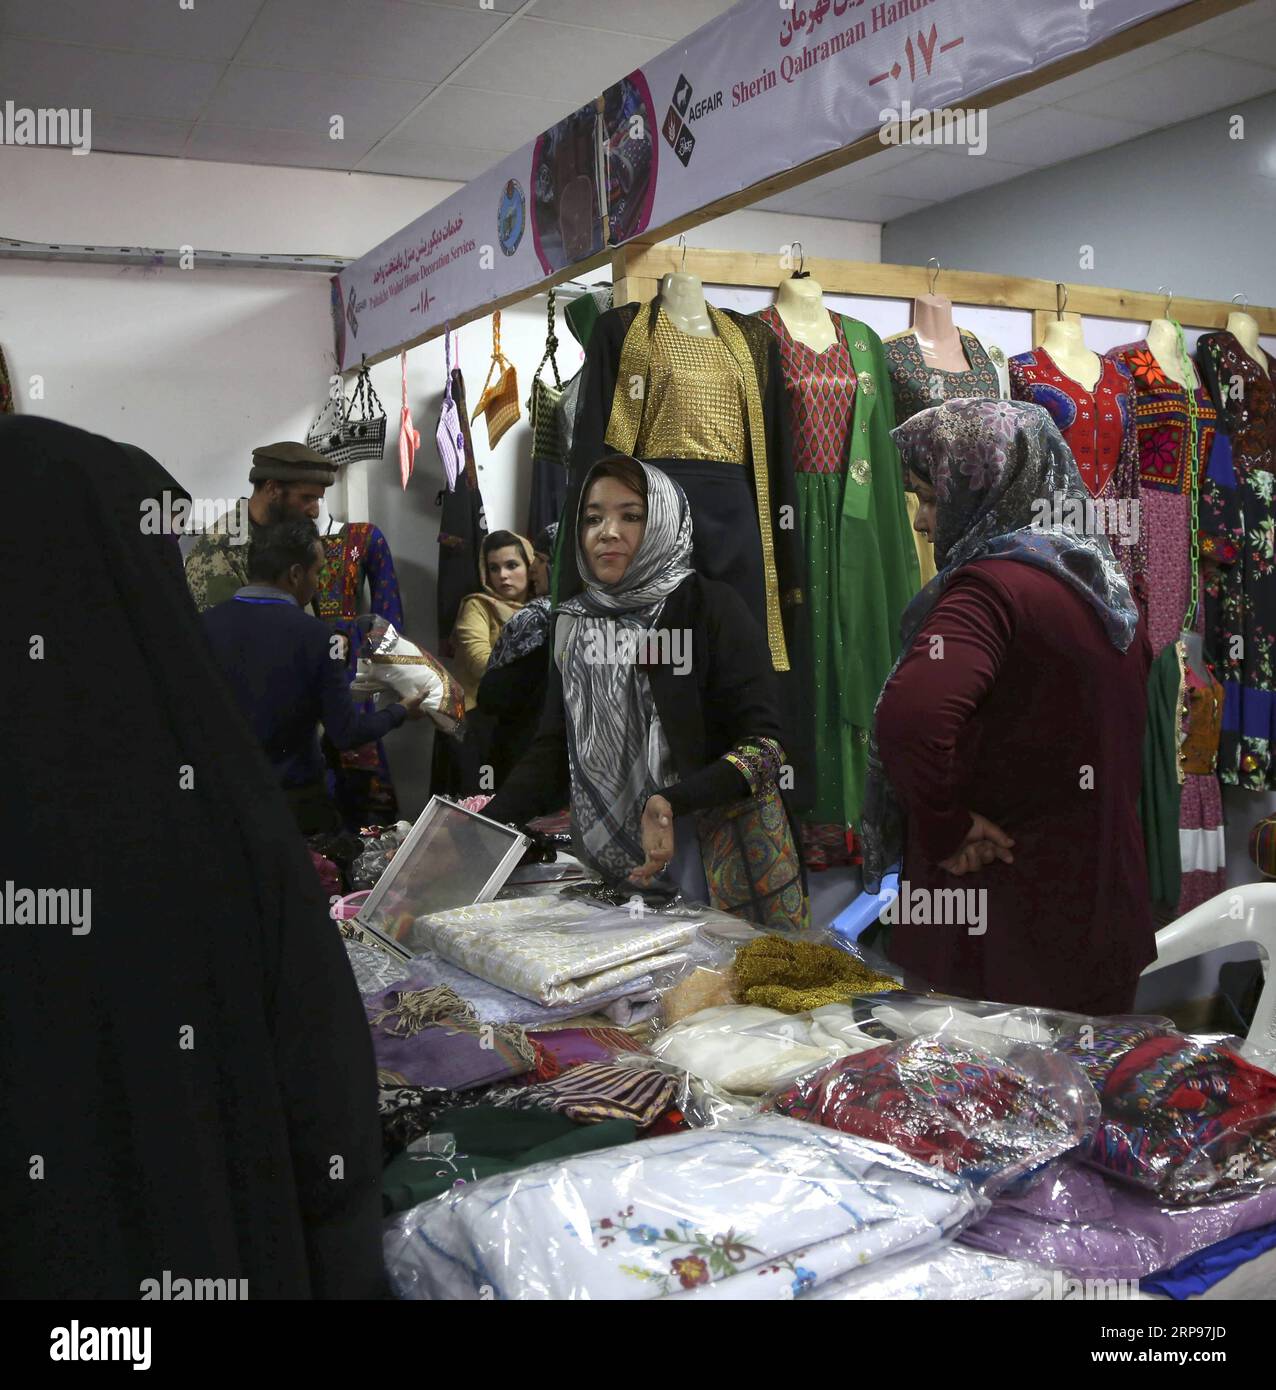 (190327) -- KABUL, March 27, 2019 -- Photo taken on March 26, 2019 shows a booth at an agriculture and handicrafts exhibition in Kabul, Afghanistan. As part of its annual program to exhibit various domestic products, Afghanistan has held its 22nd agriculture and handicrafts exhibition in capital Kabul. The exhibition, which was held from March 22-26 at the Badam Bagh agriculture park, a garden in northern outskirts of Kabul city, was visited by thousands of people from around the country. ) AFGHANISTAN-KABUL-AGRICULTURE AND HANDICRAFTS EXHIBITION RahmatxAlizadah PUBLICATIONxNOTxINxCHN Stock Photo